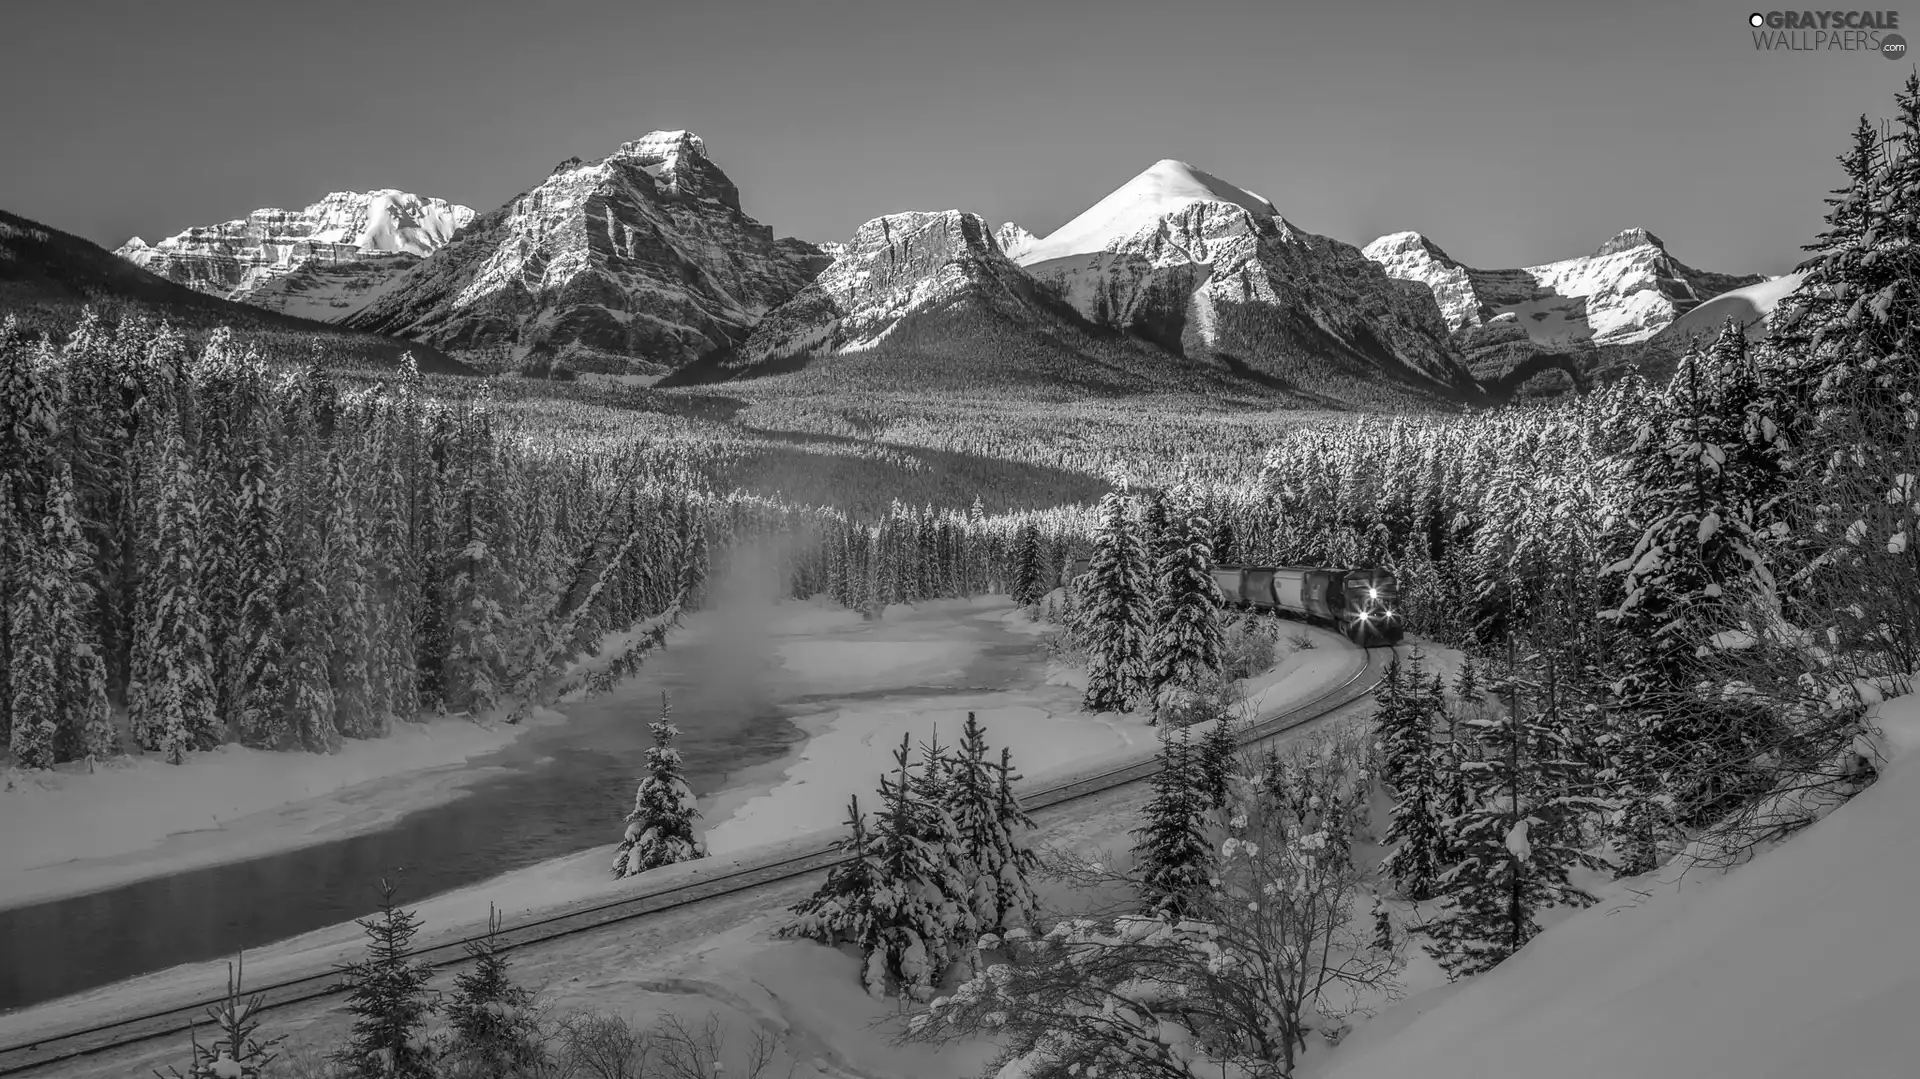 woods, Train, River, Canada, Banff National Park, Mountains, winter, rocky mountains